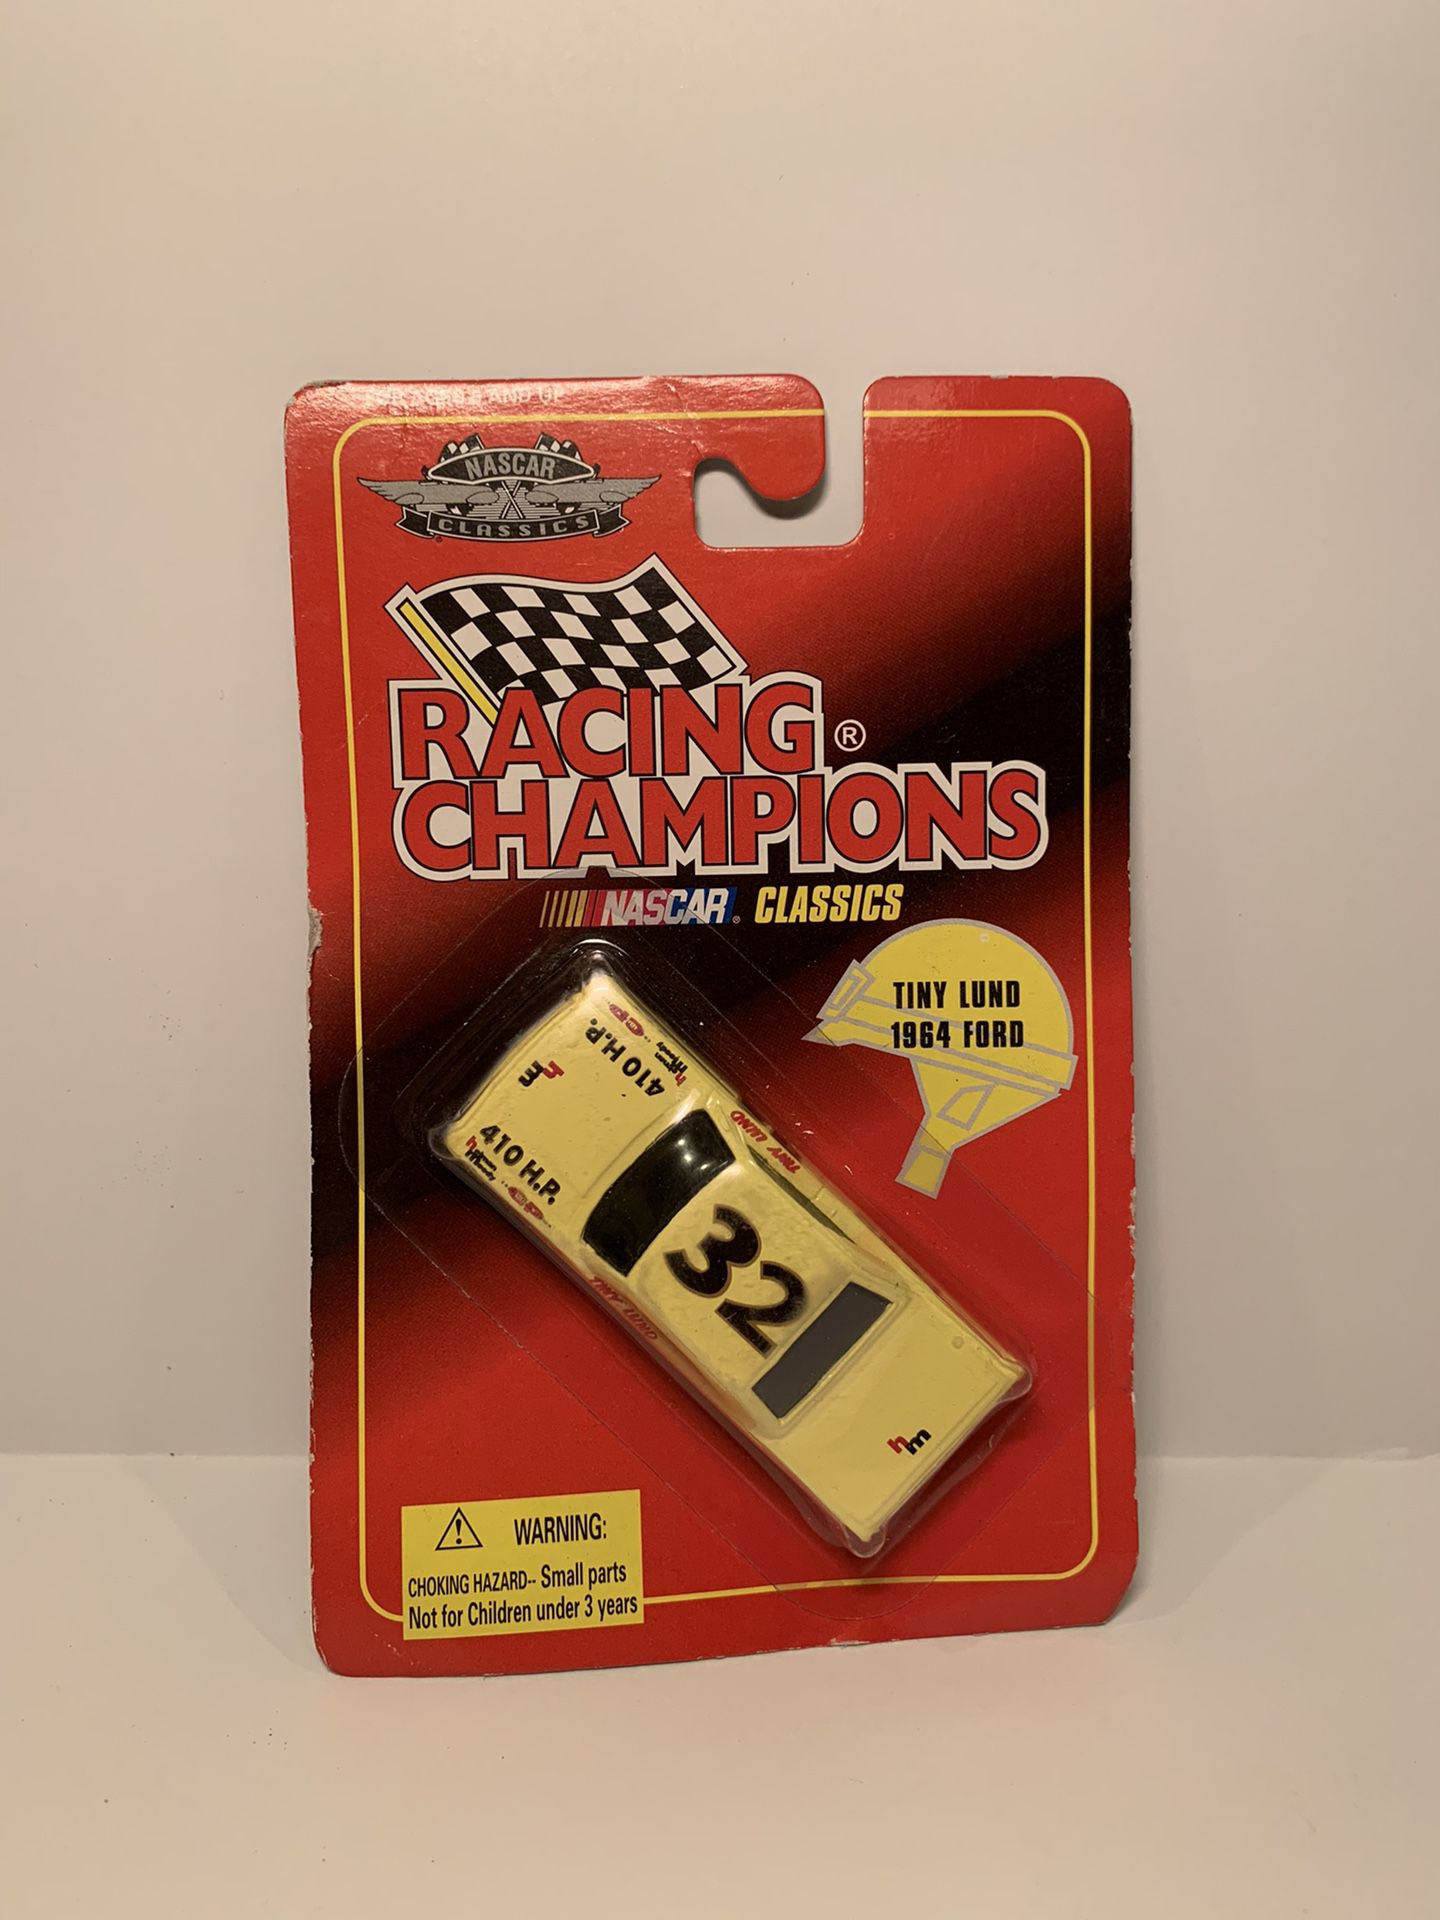 Racing Champions 1996 Nascar Classics Ford 1964 Tiny Lund #32 Yellow